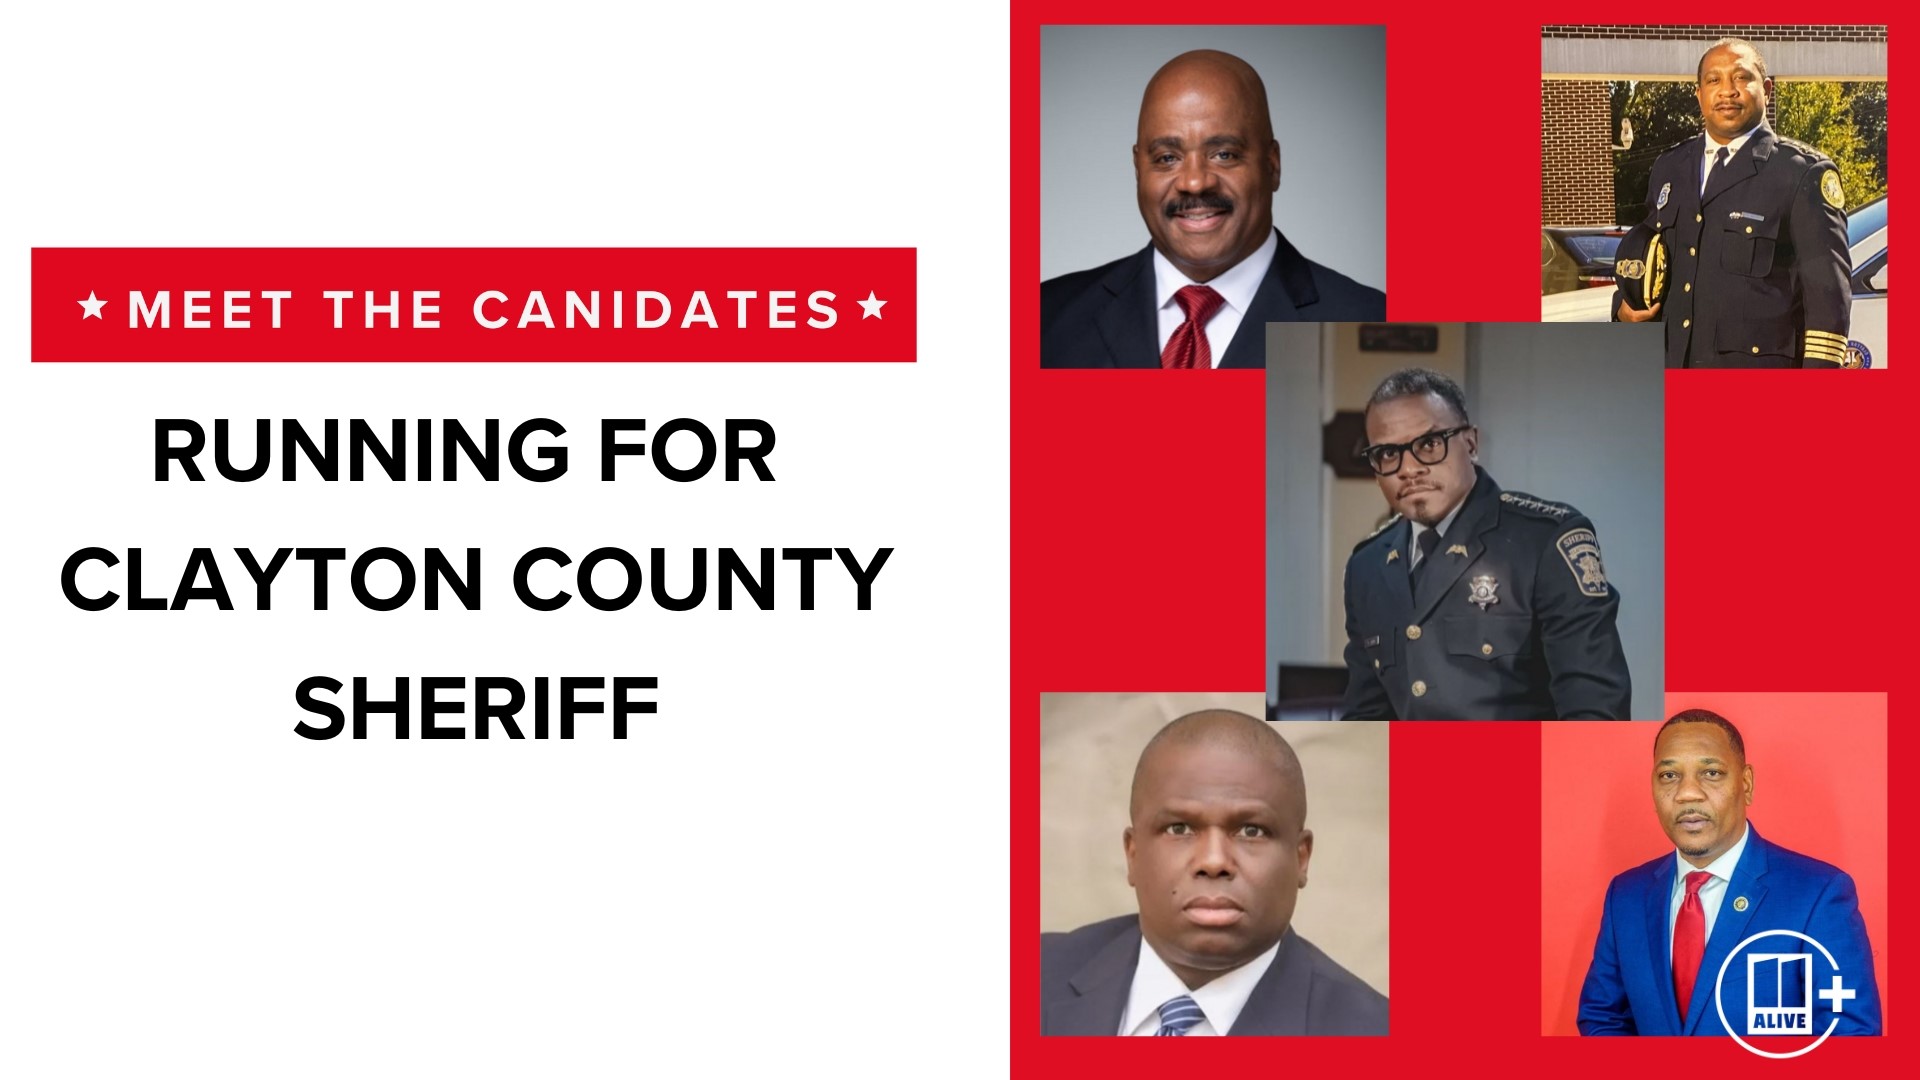 A special election will be held on Tuesday, March 21. Five candidates are running for the seat.